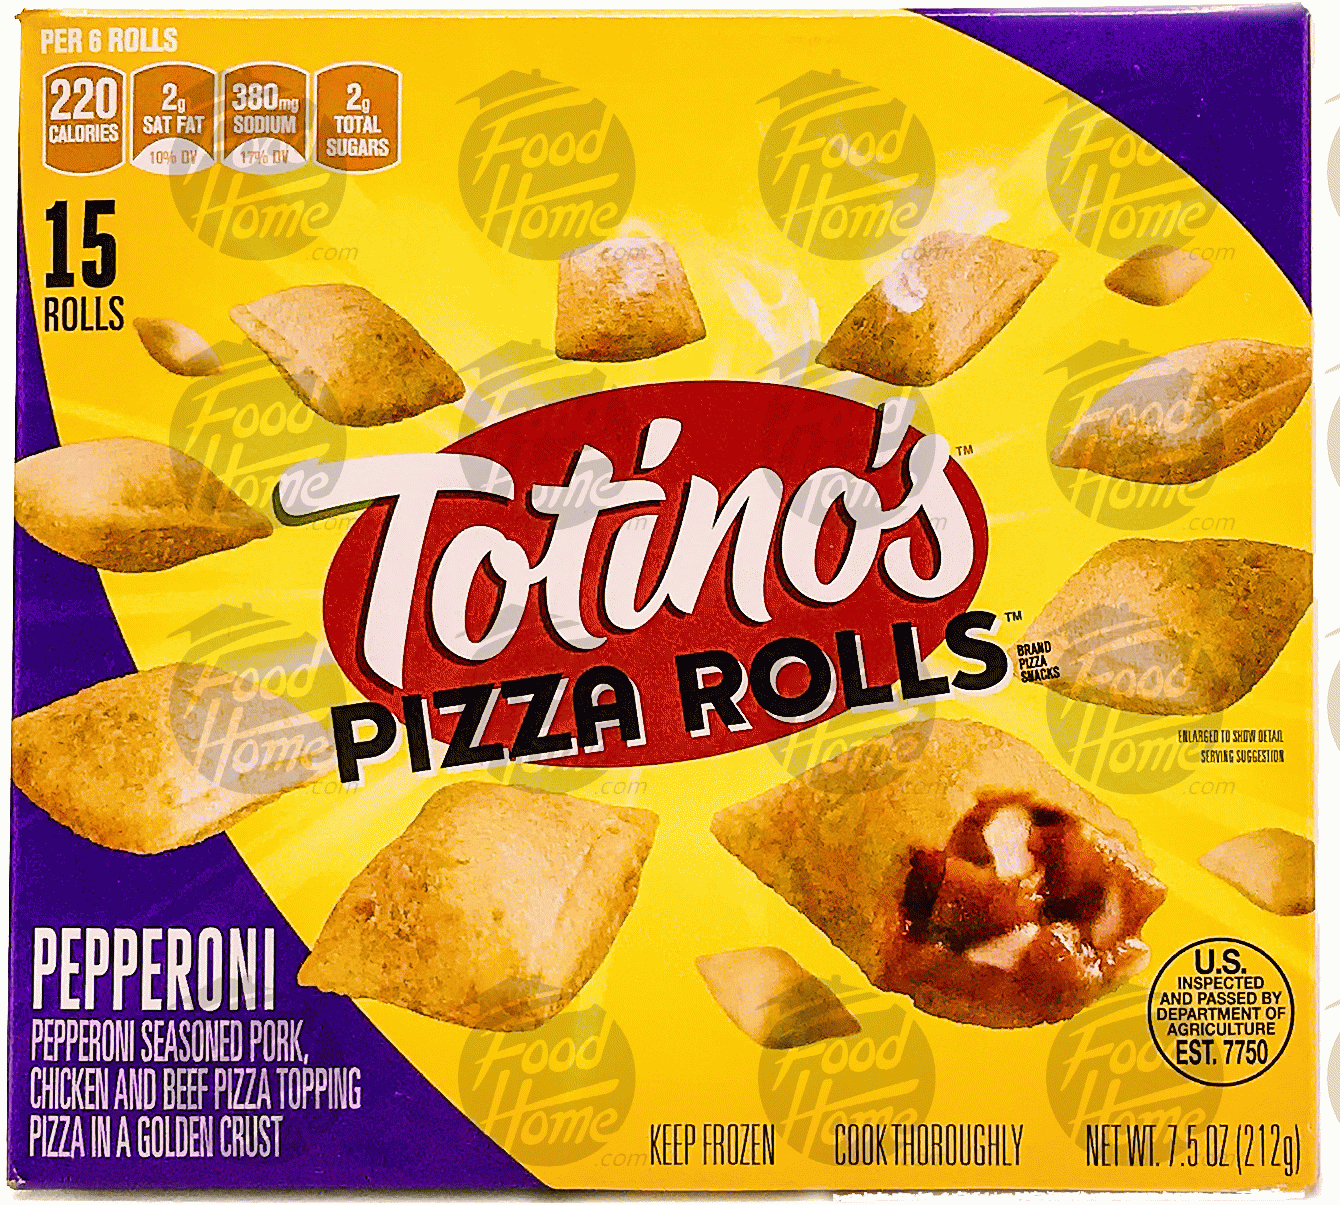 Totino's Pizza Rolls pepperoni pizza rolls 15-count Full-Size Picture